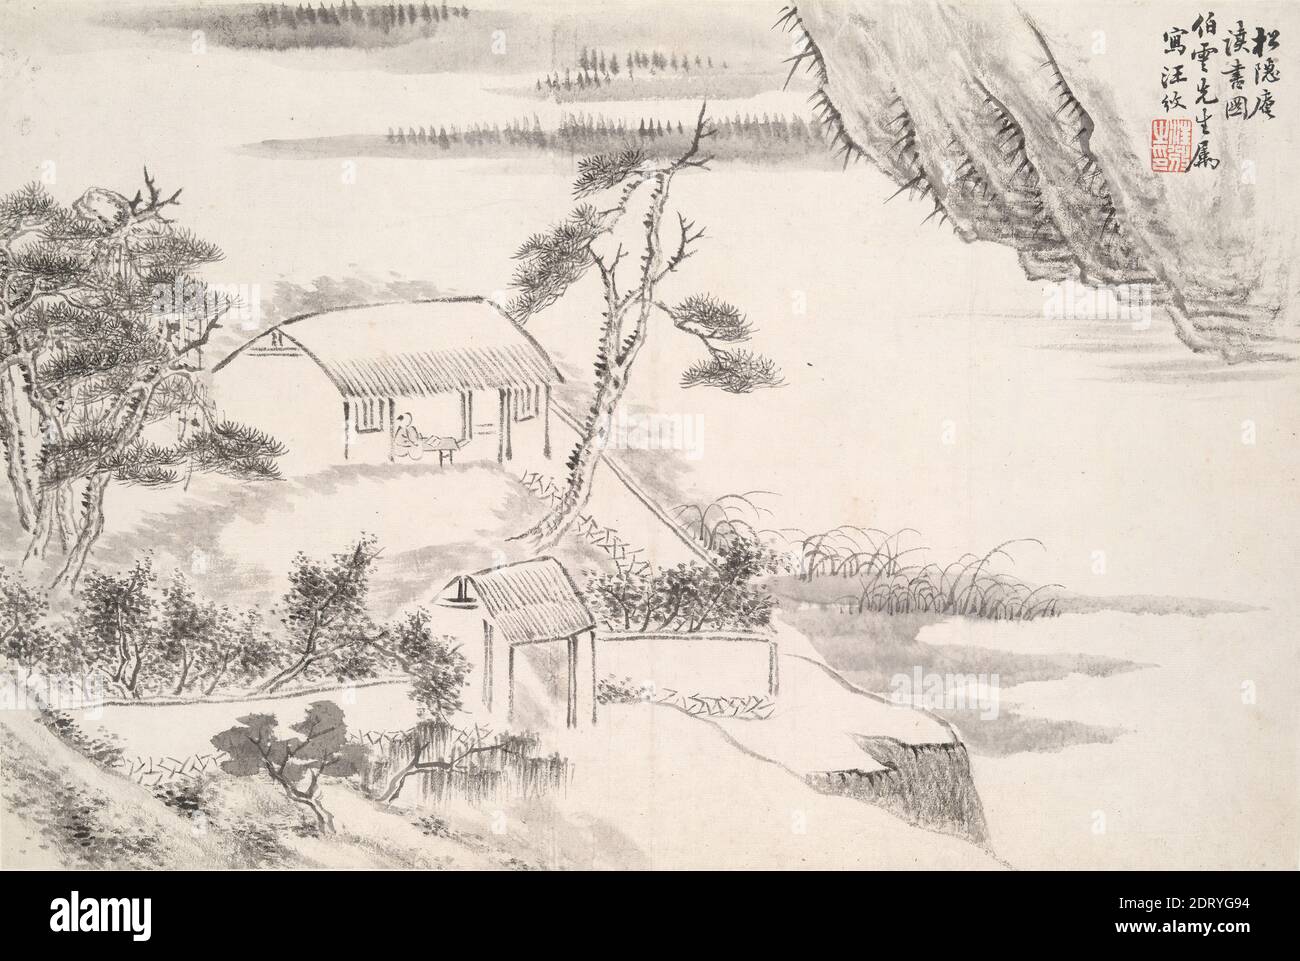 Artist: Wang Bin, Reading at the Secluded Pine Studio (Song yin an), 19th century, Album leaf, ink on paper, without mounting: 8 7/16 × 12 13/16 in. (21.5 × 32.5 cm), China, Chinese, Qing dynasty (1644–1911), Paintings Stock Photo